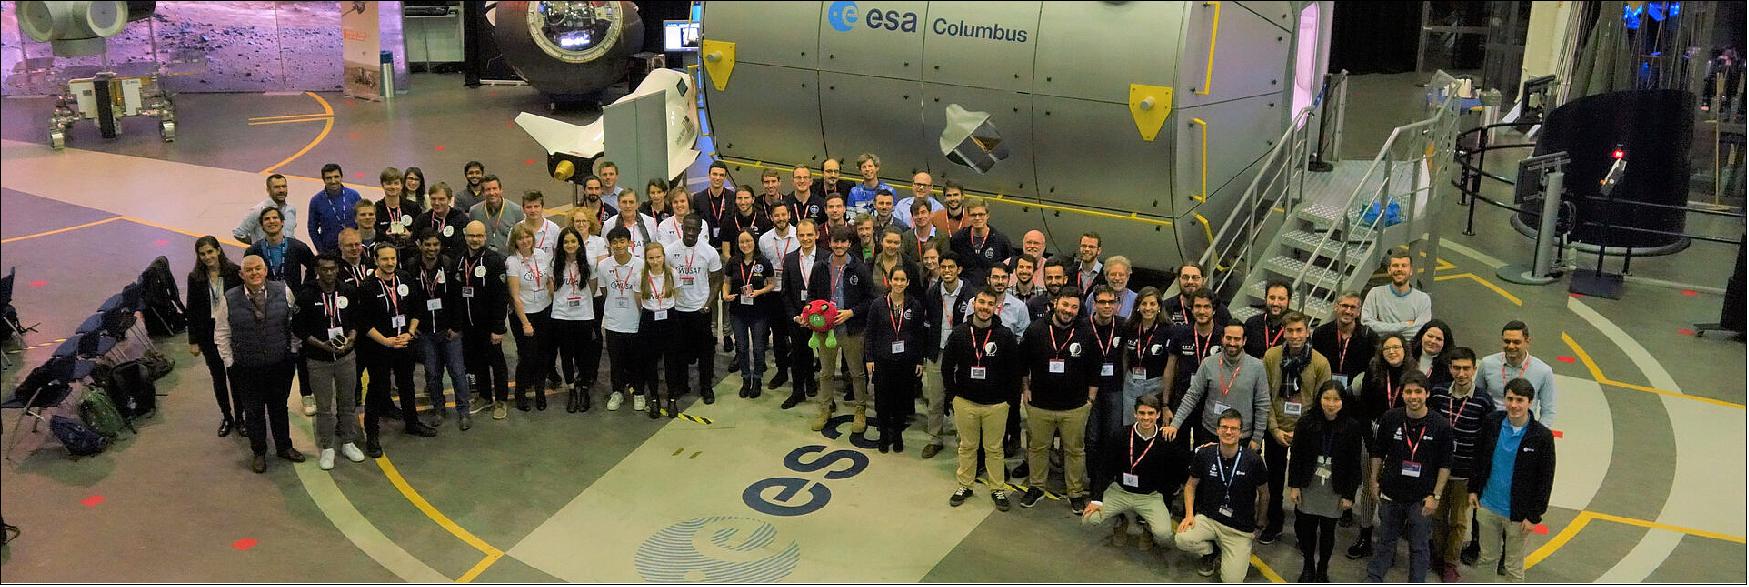 Figure 117: Group photo of Selection Workshop attendees (image credit: ESA)